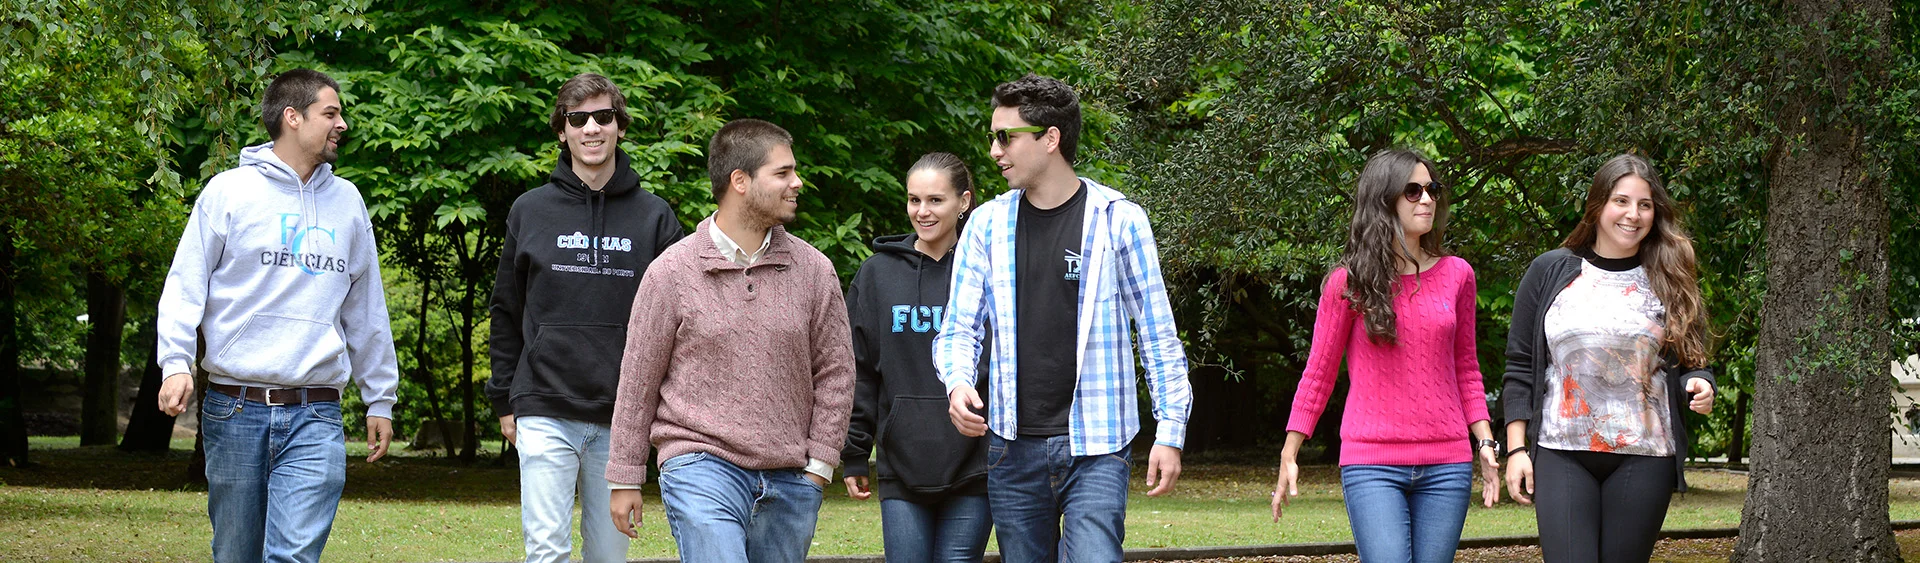 Students in the gardens of the Faculty of Sciences of the University of Porto